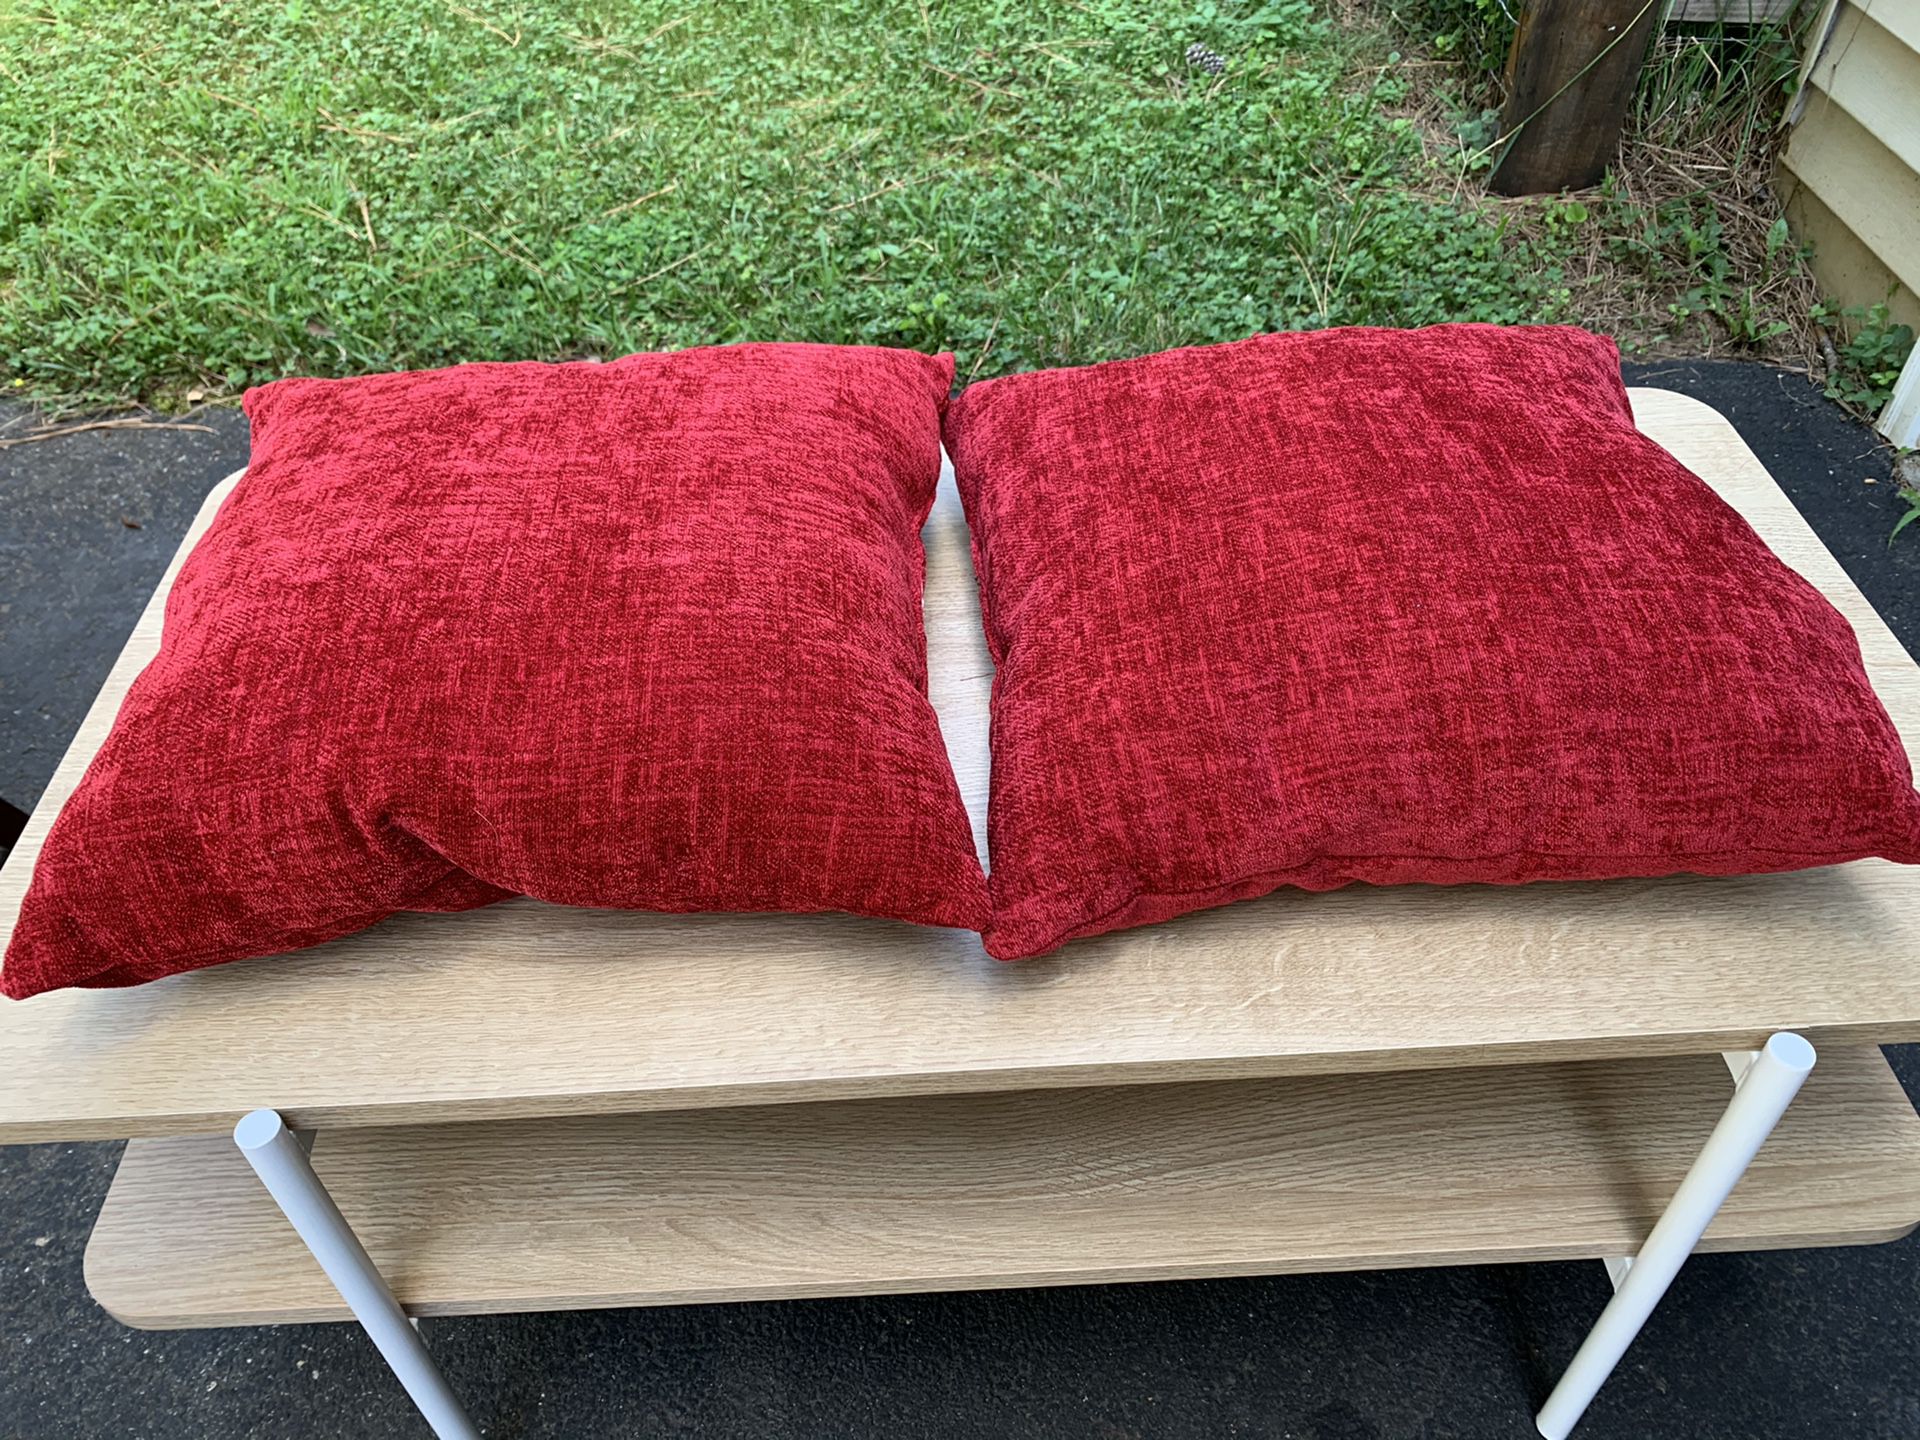 Two red pillows